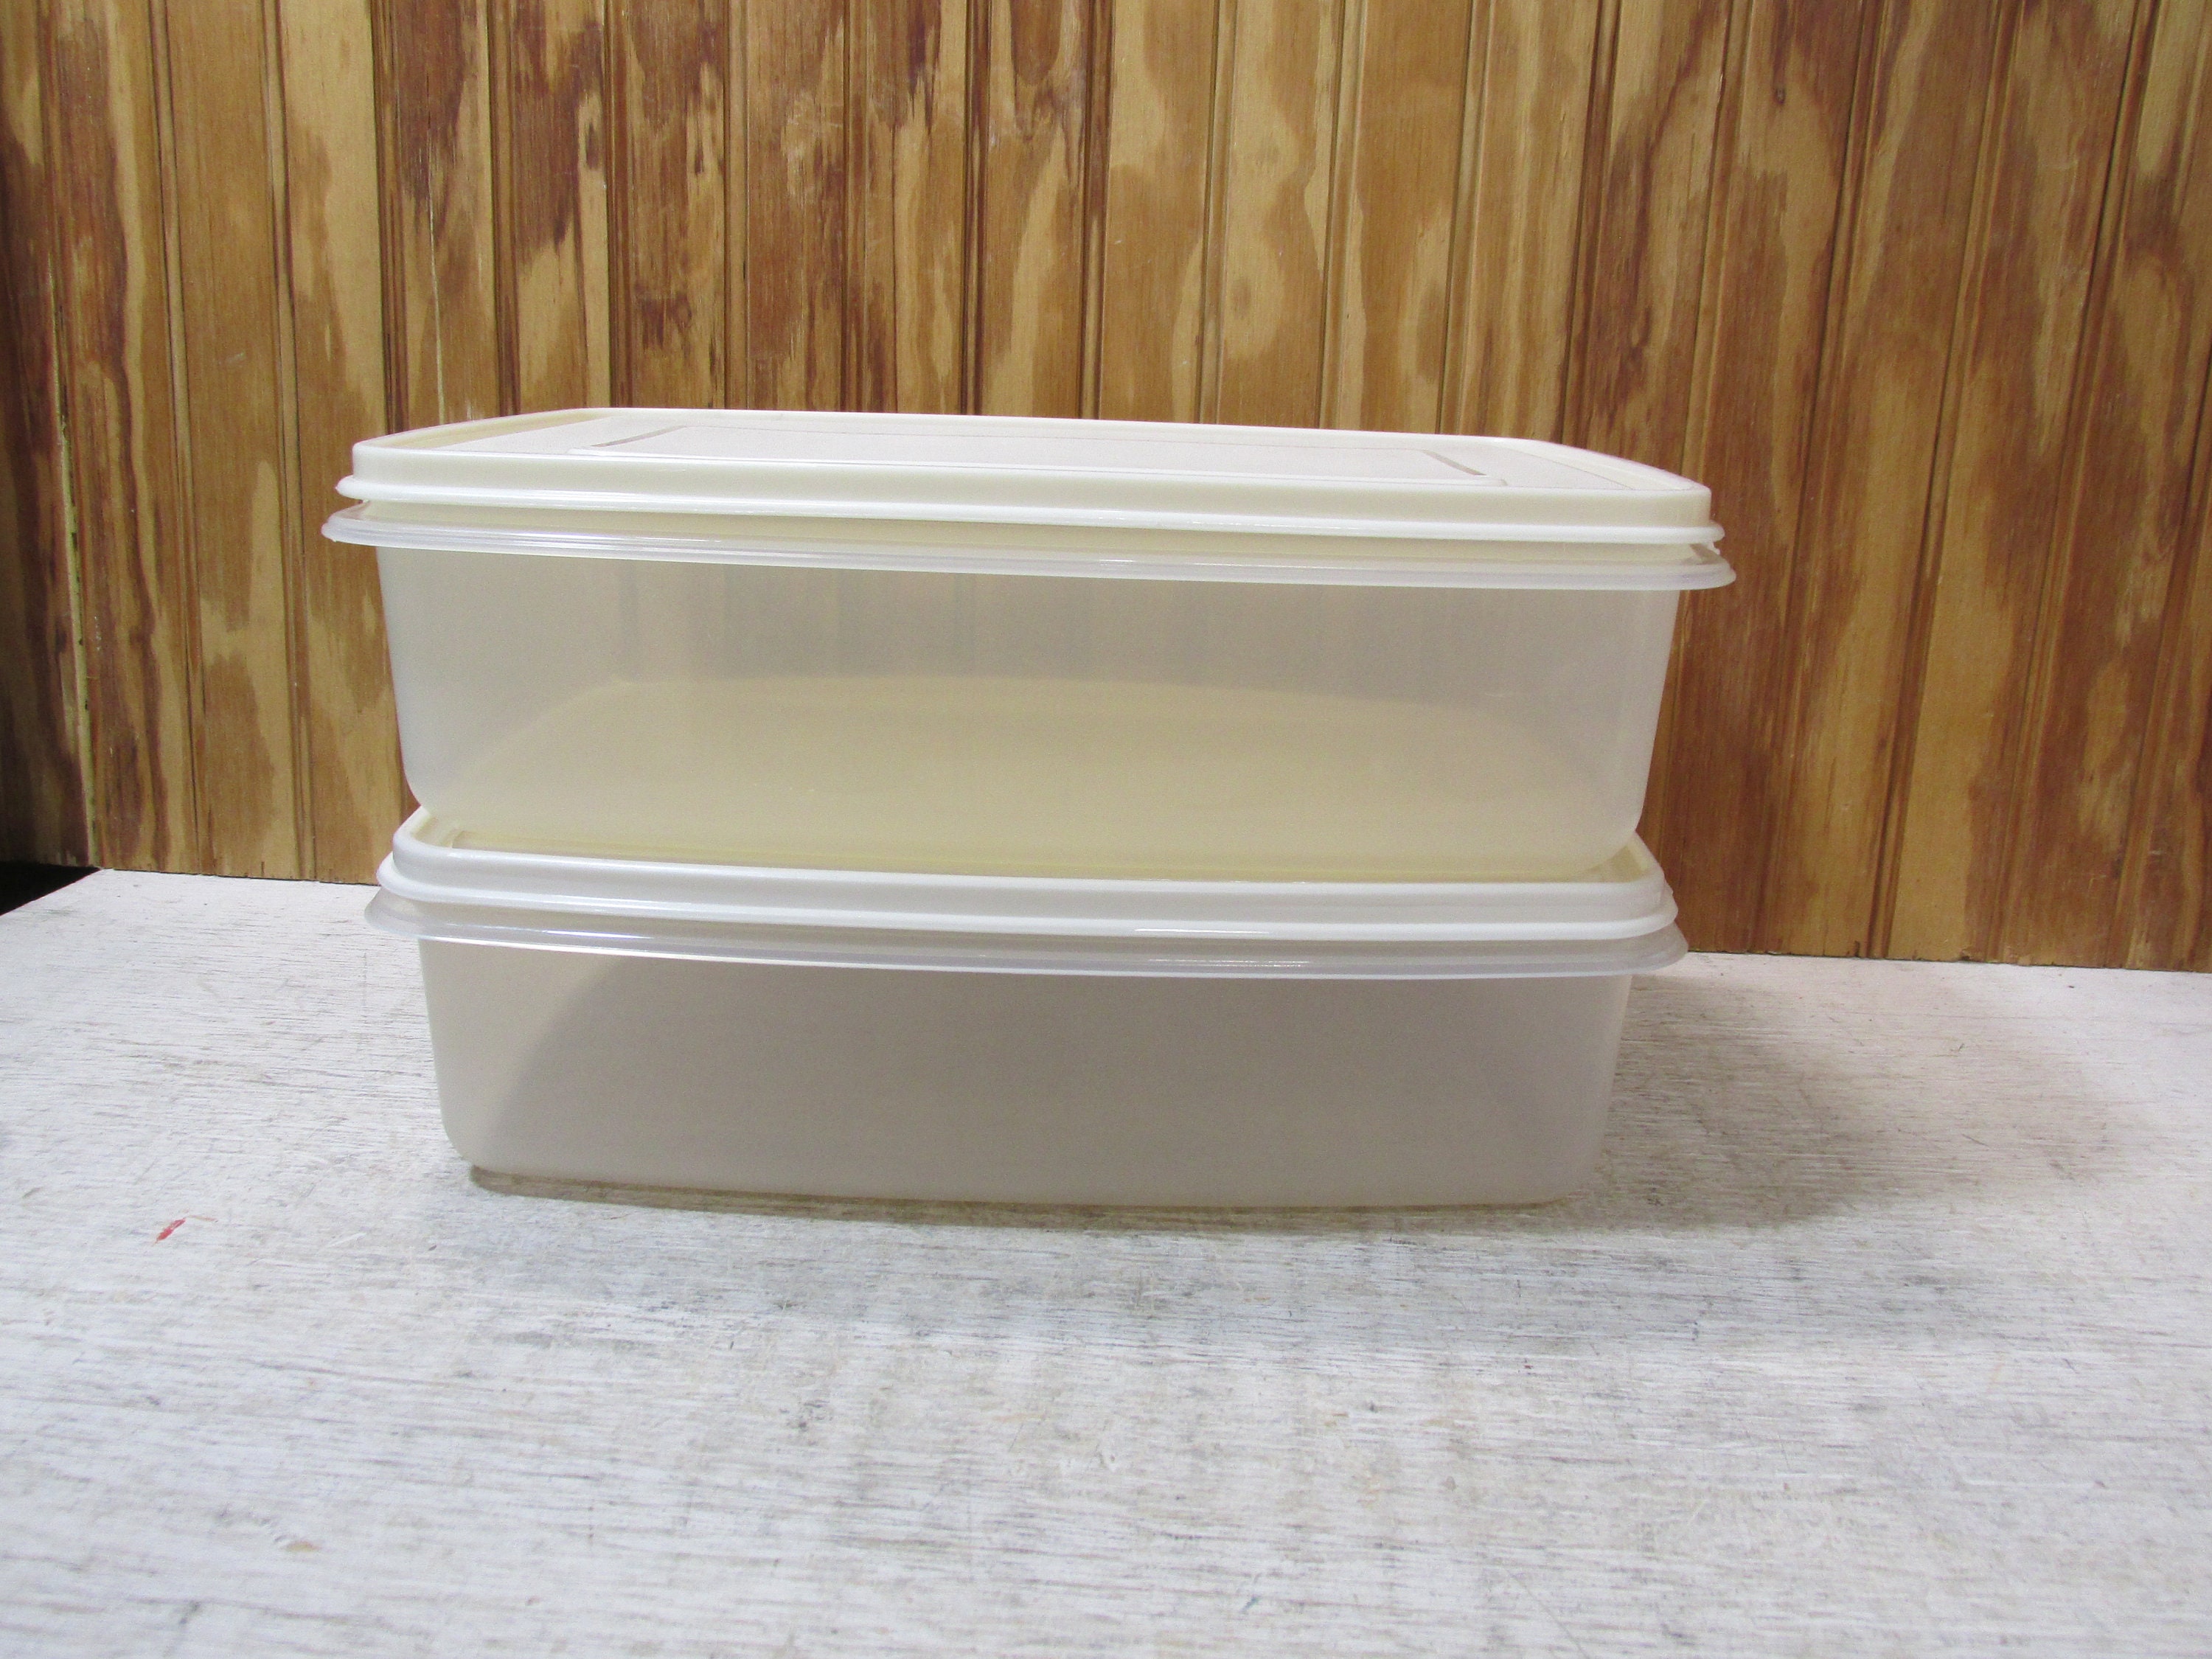 Replacement lids for Rubbermaid Brilliance containers? : r